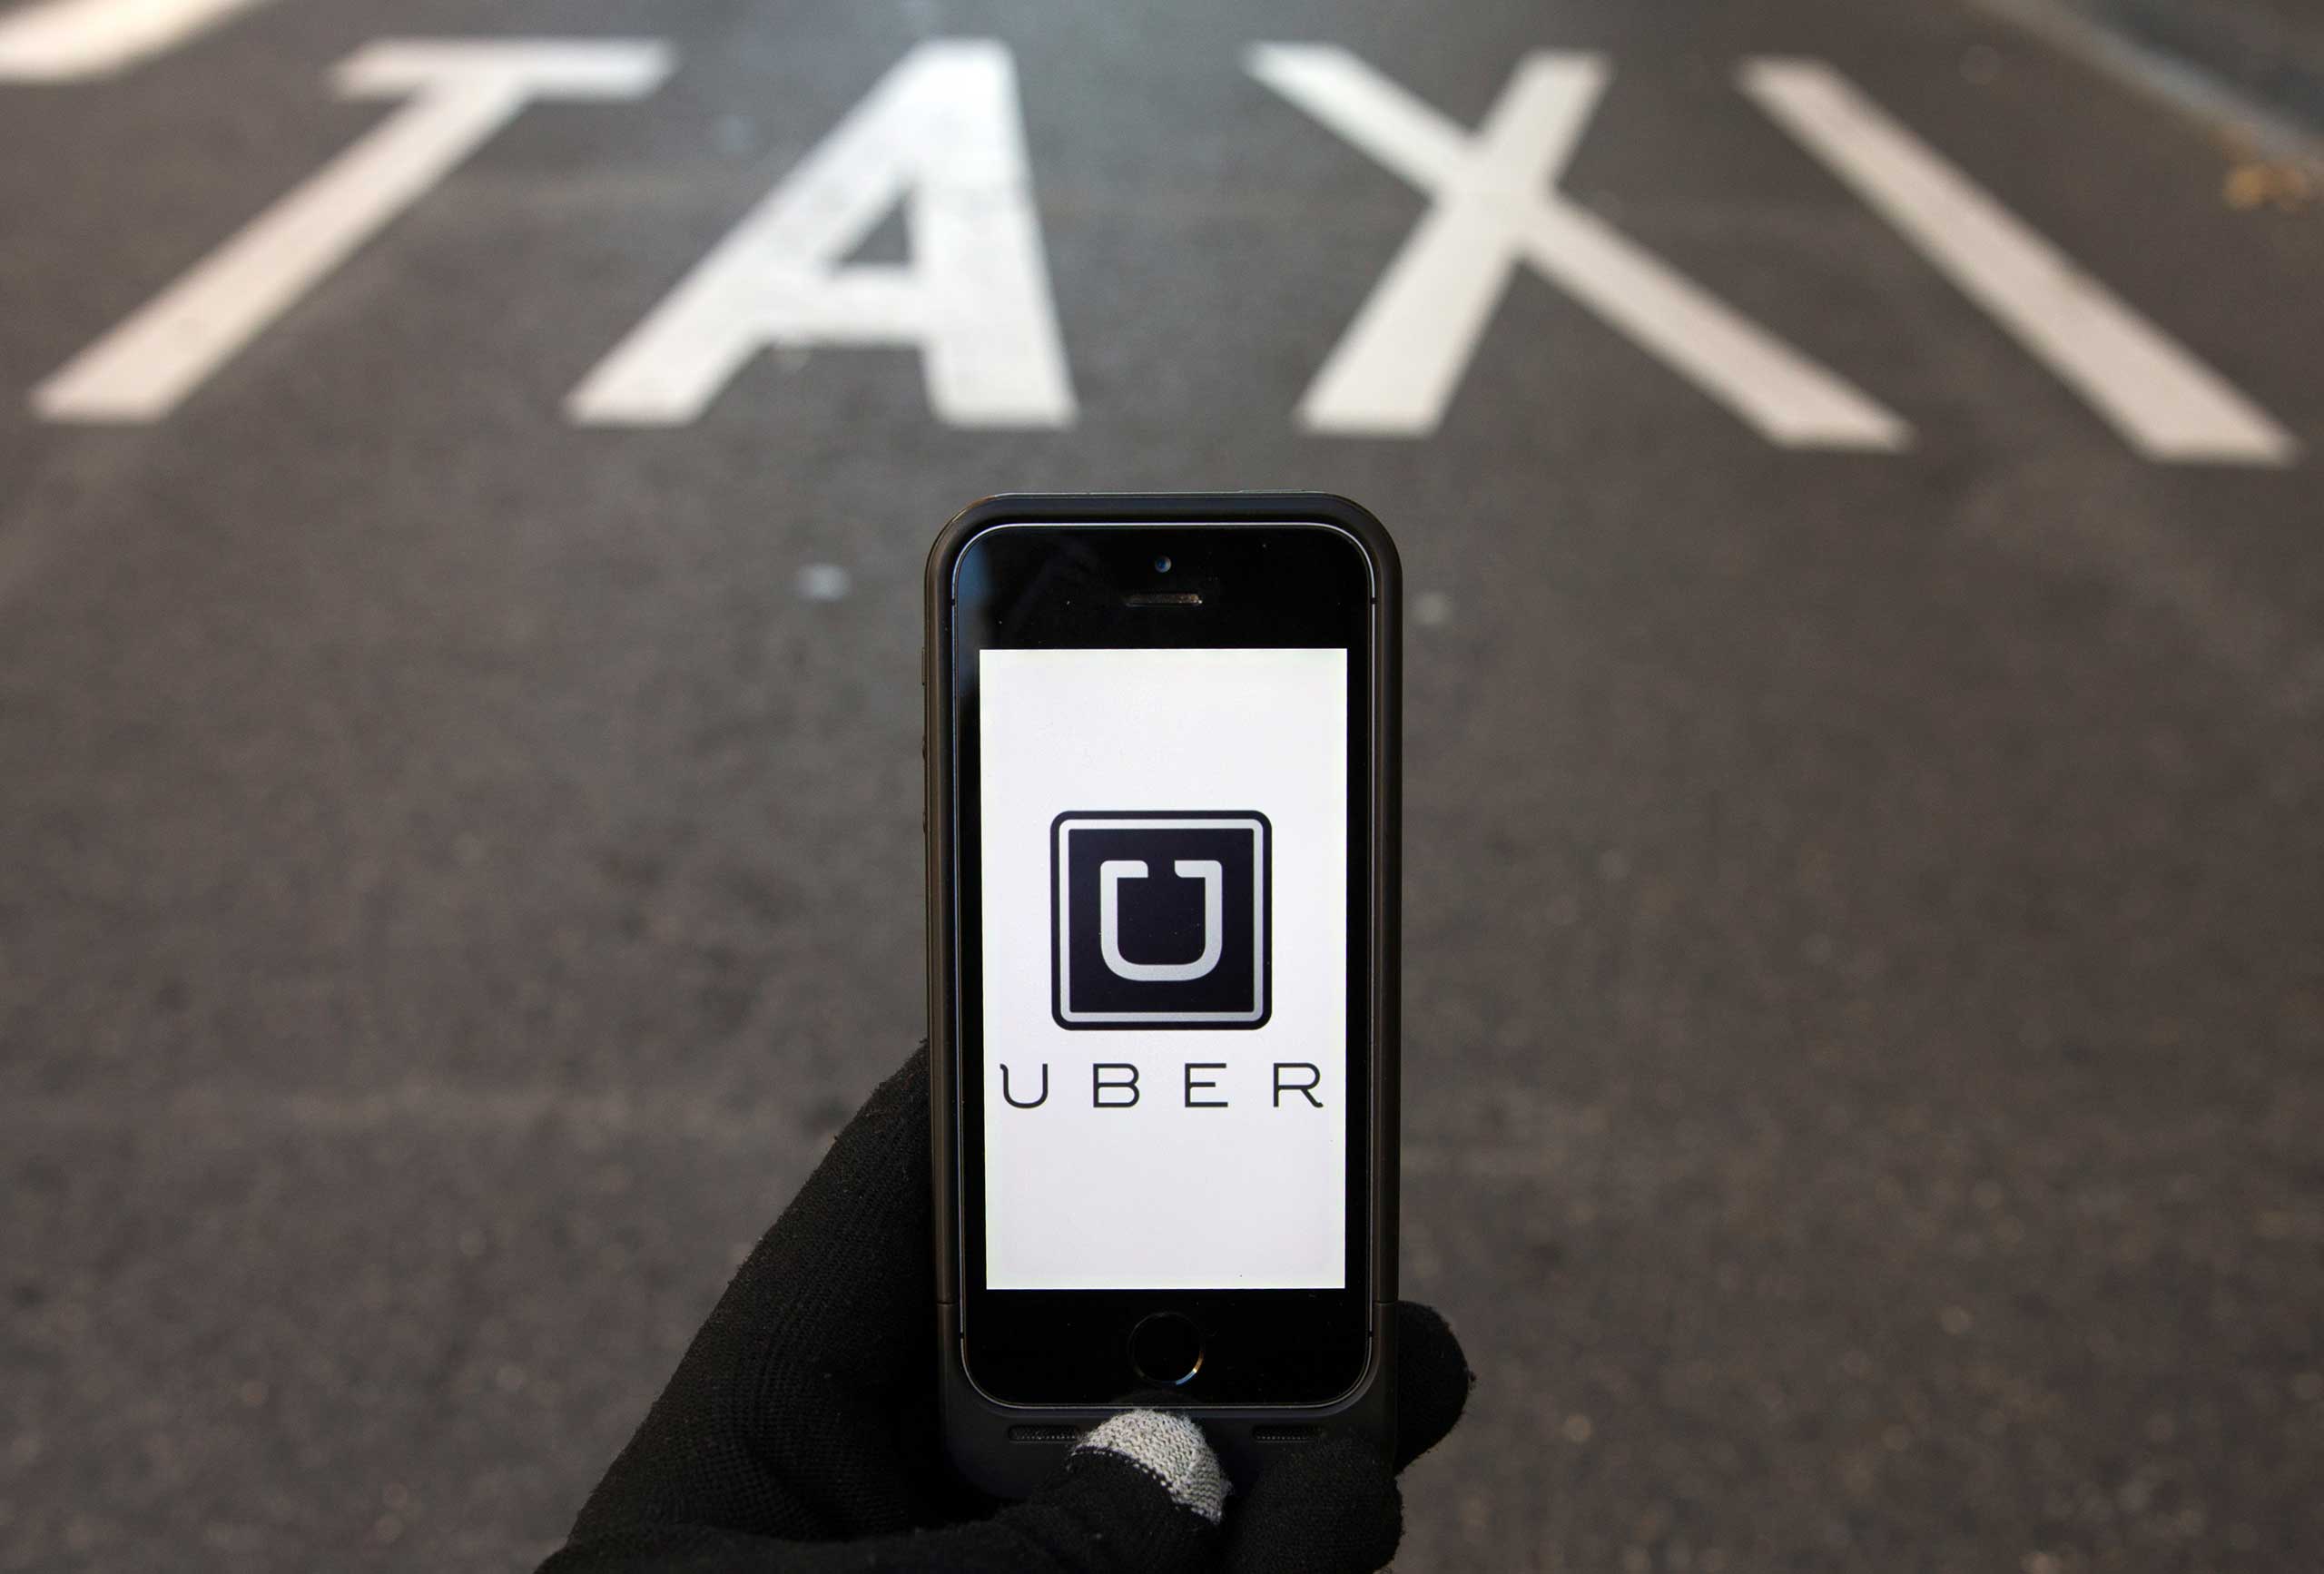 The Uber ride sharing app is used in Madrid on Dec. 10, 2014. (Sergio Perez—Reuters)